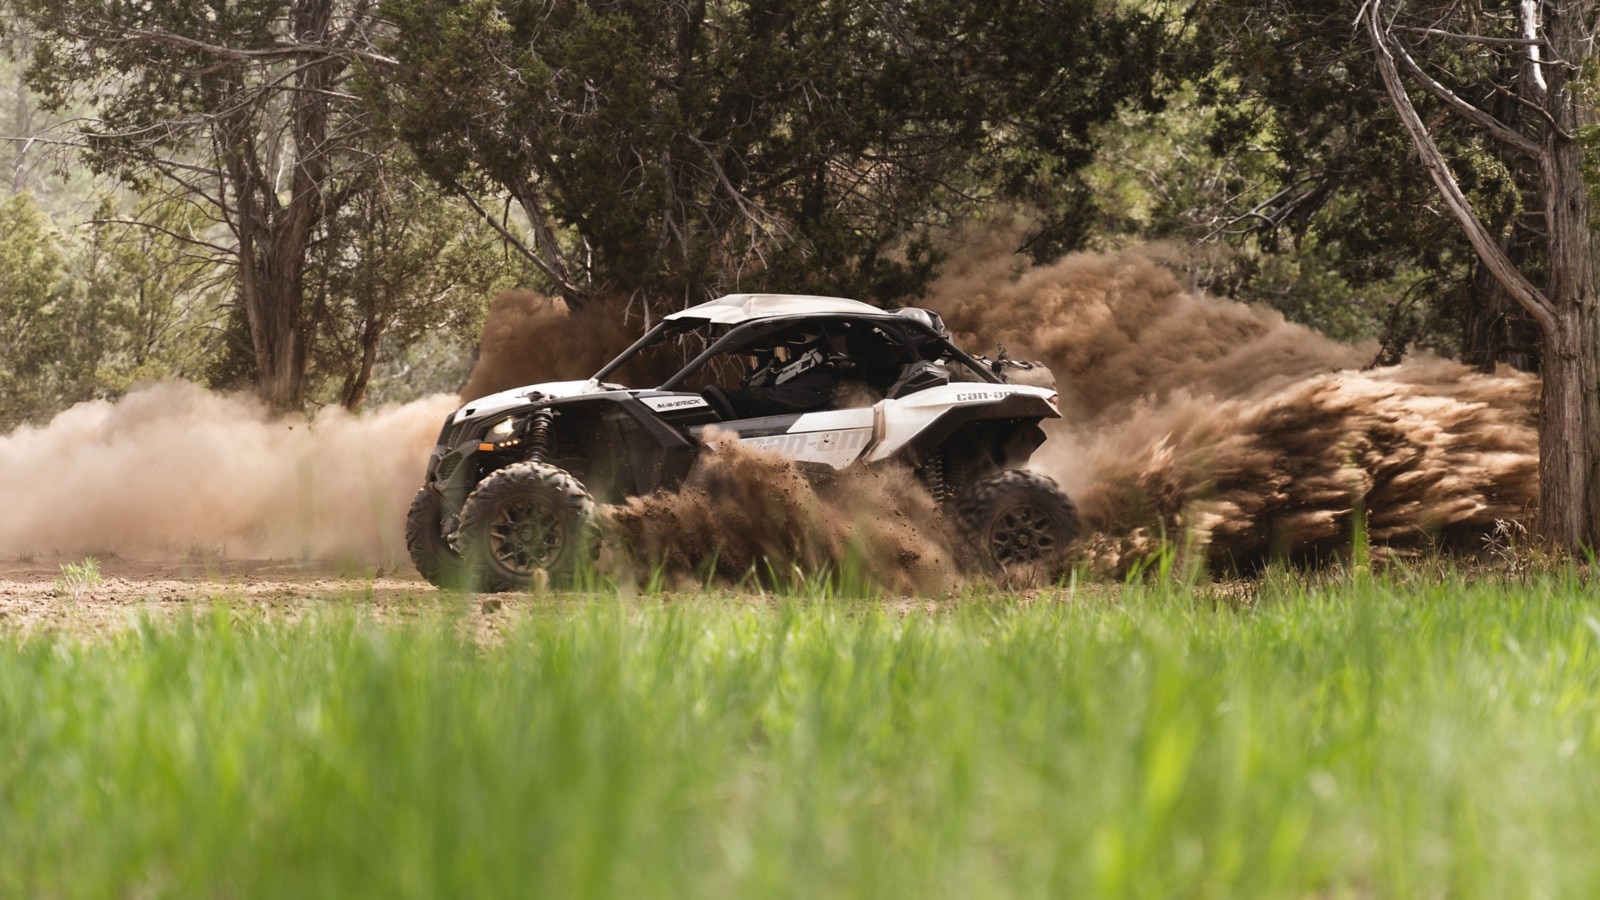 Can-Am Maverick X3 doing a 360° in dust